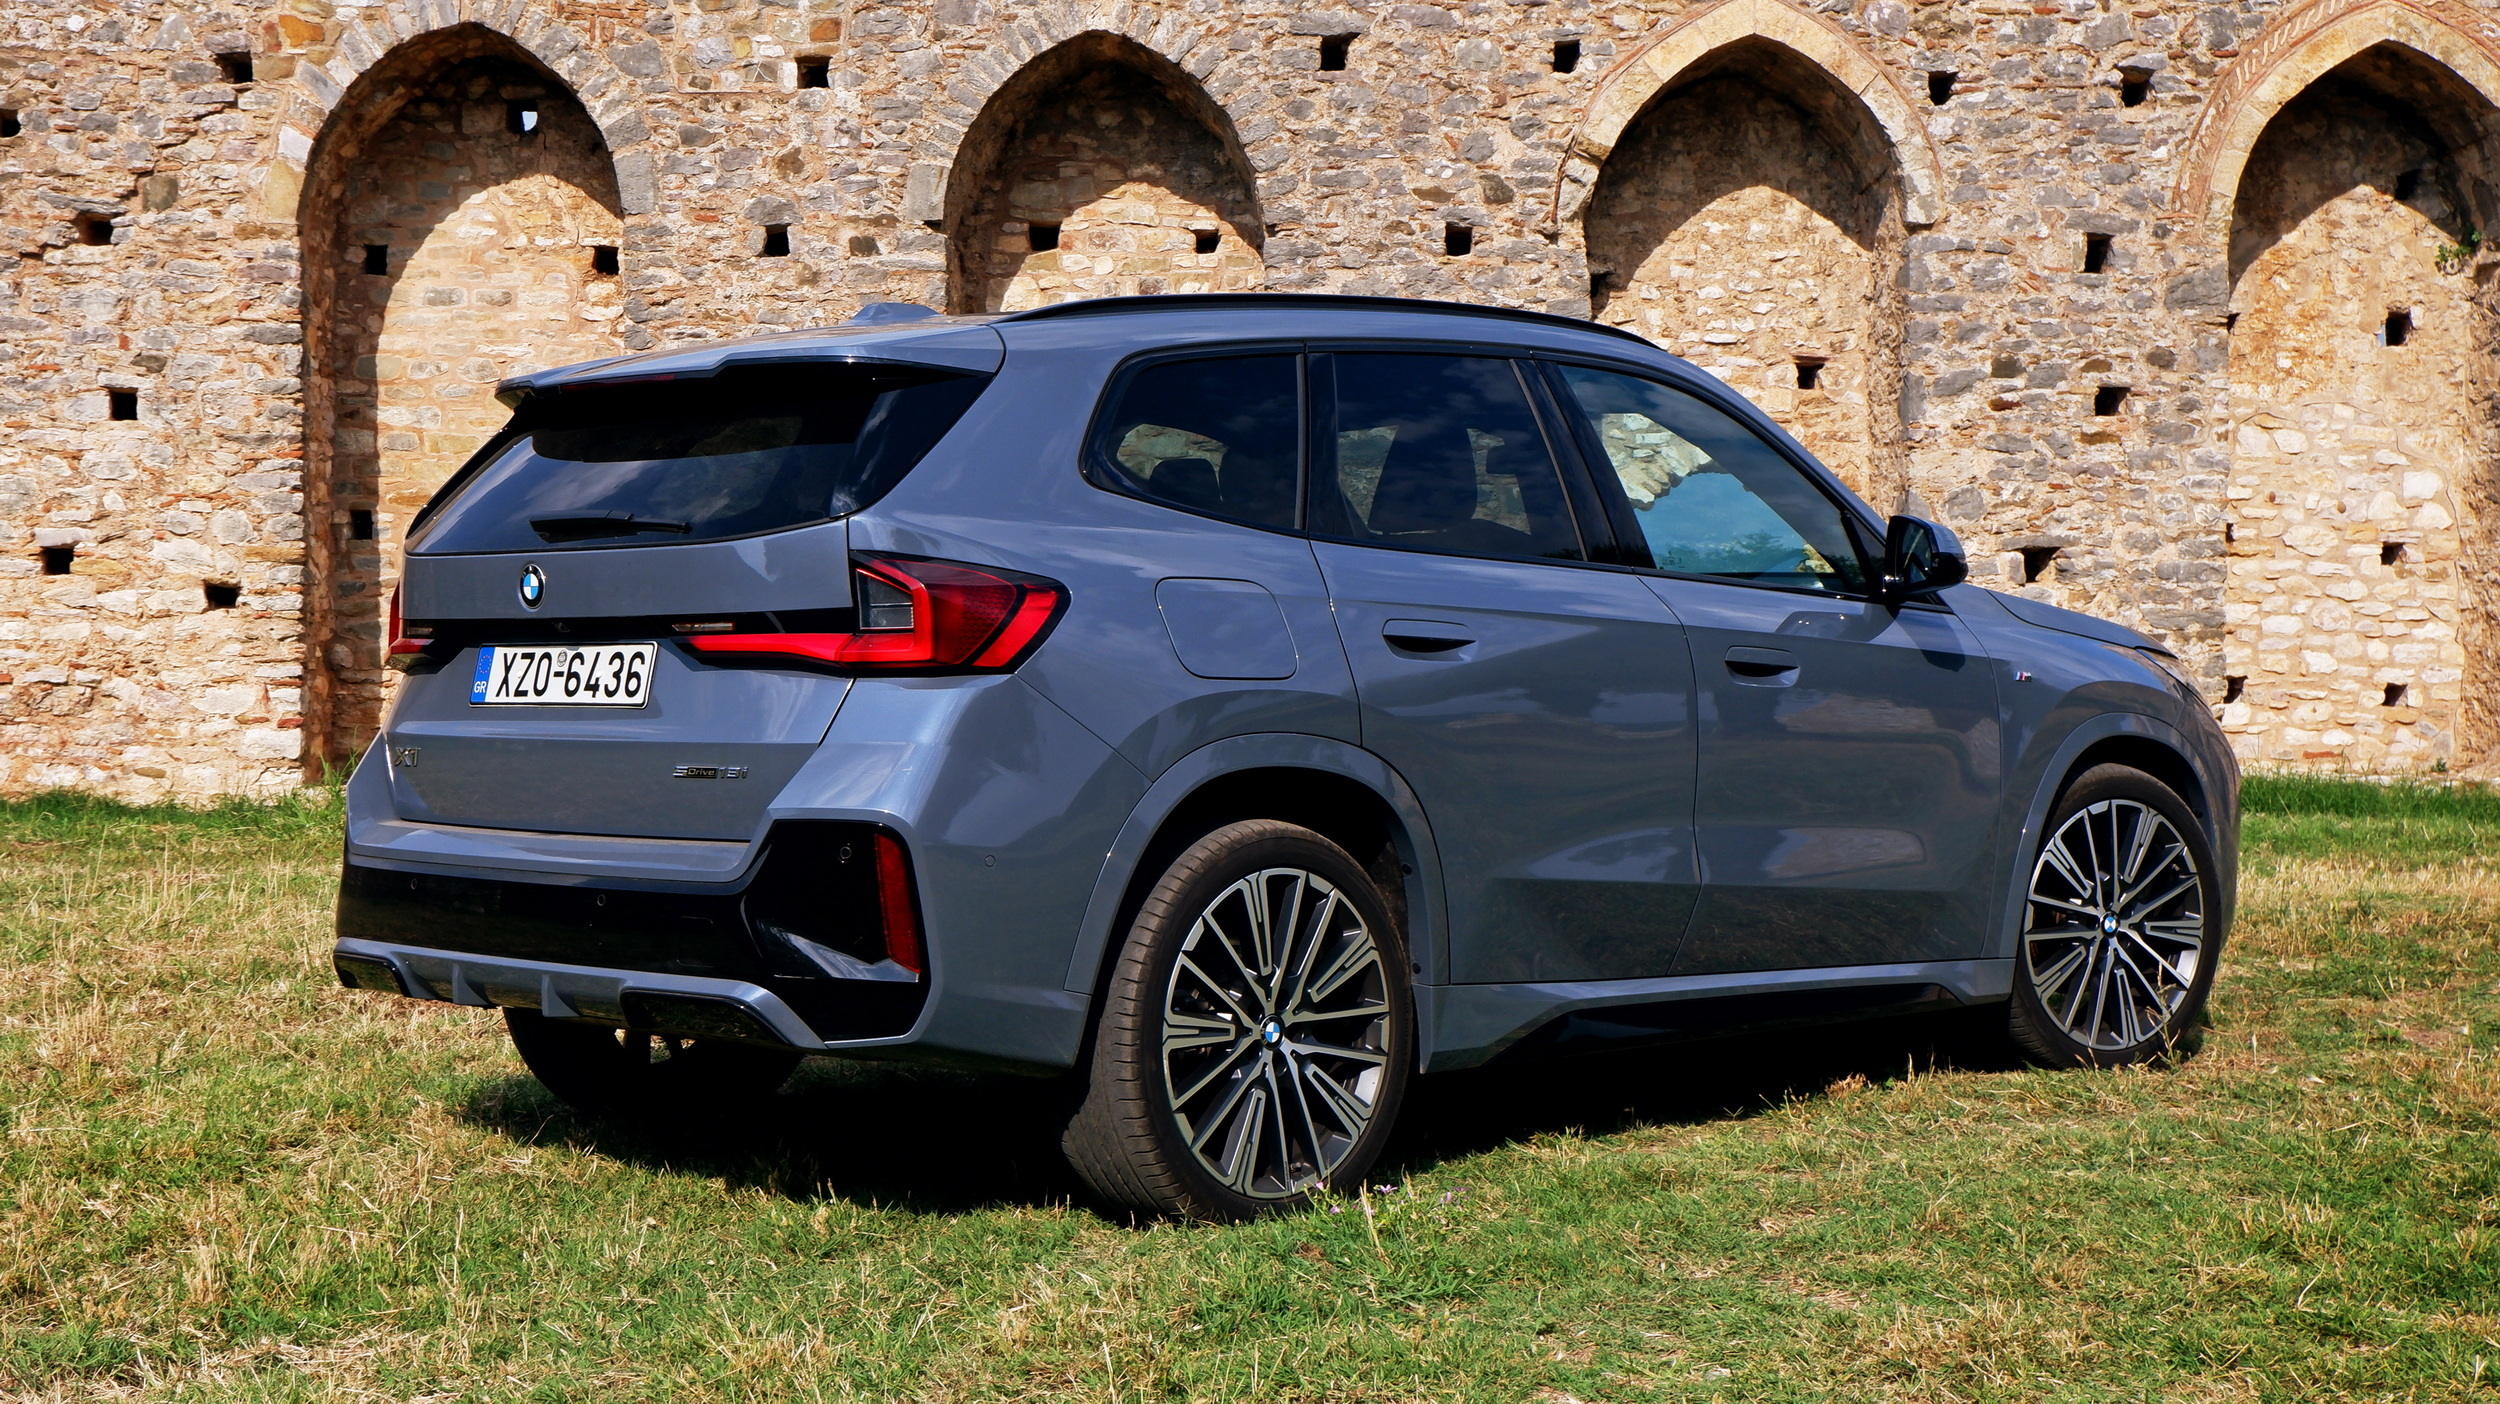 We're Driving The EU-Spec 3-Cylinder BMW X1, What Would You Like